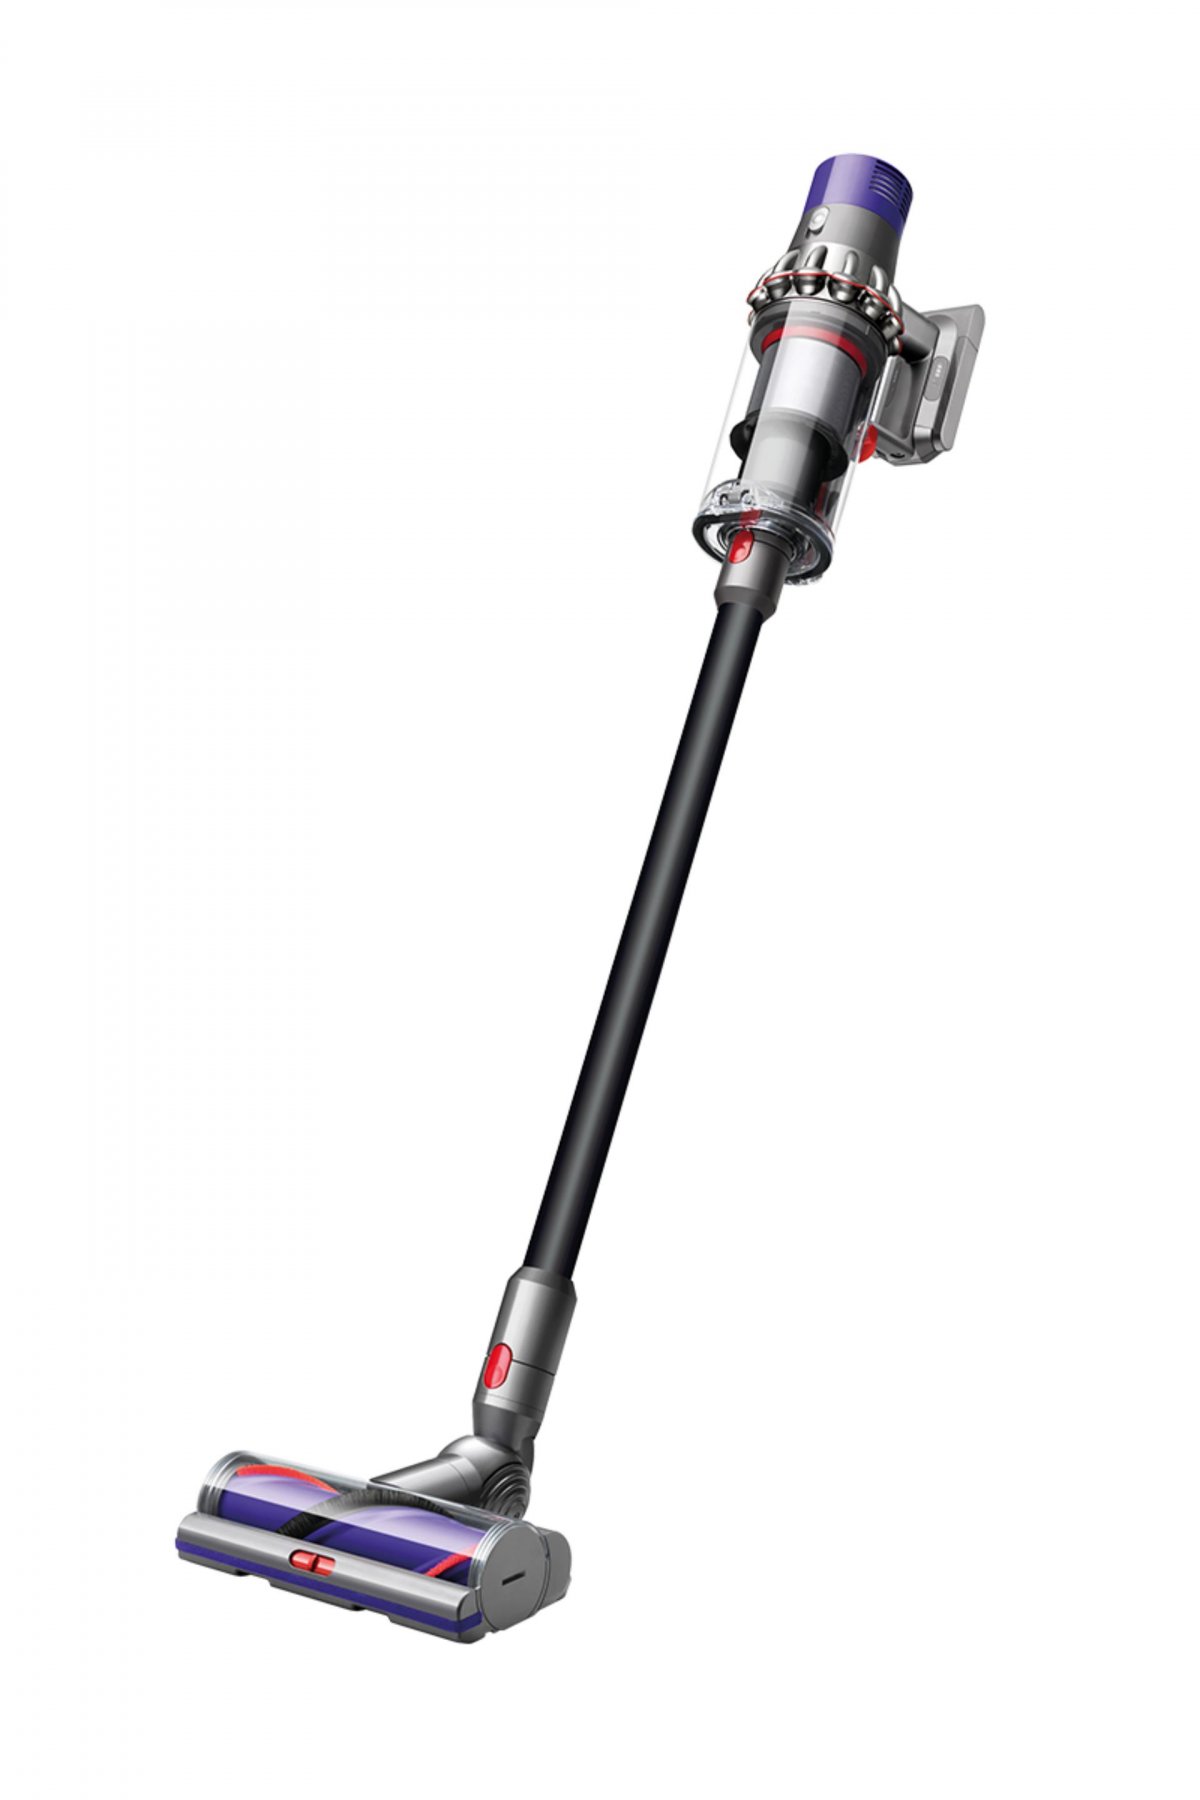 The Dyson V10 Absolute cordless vacuum.